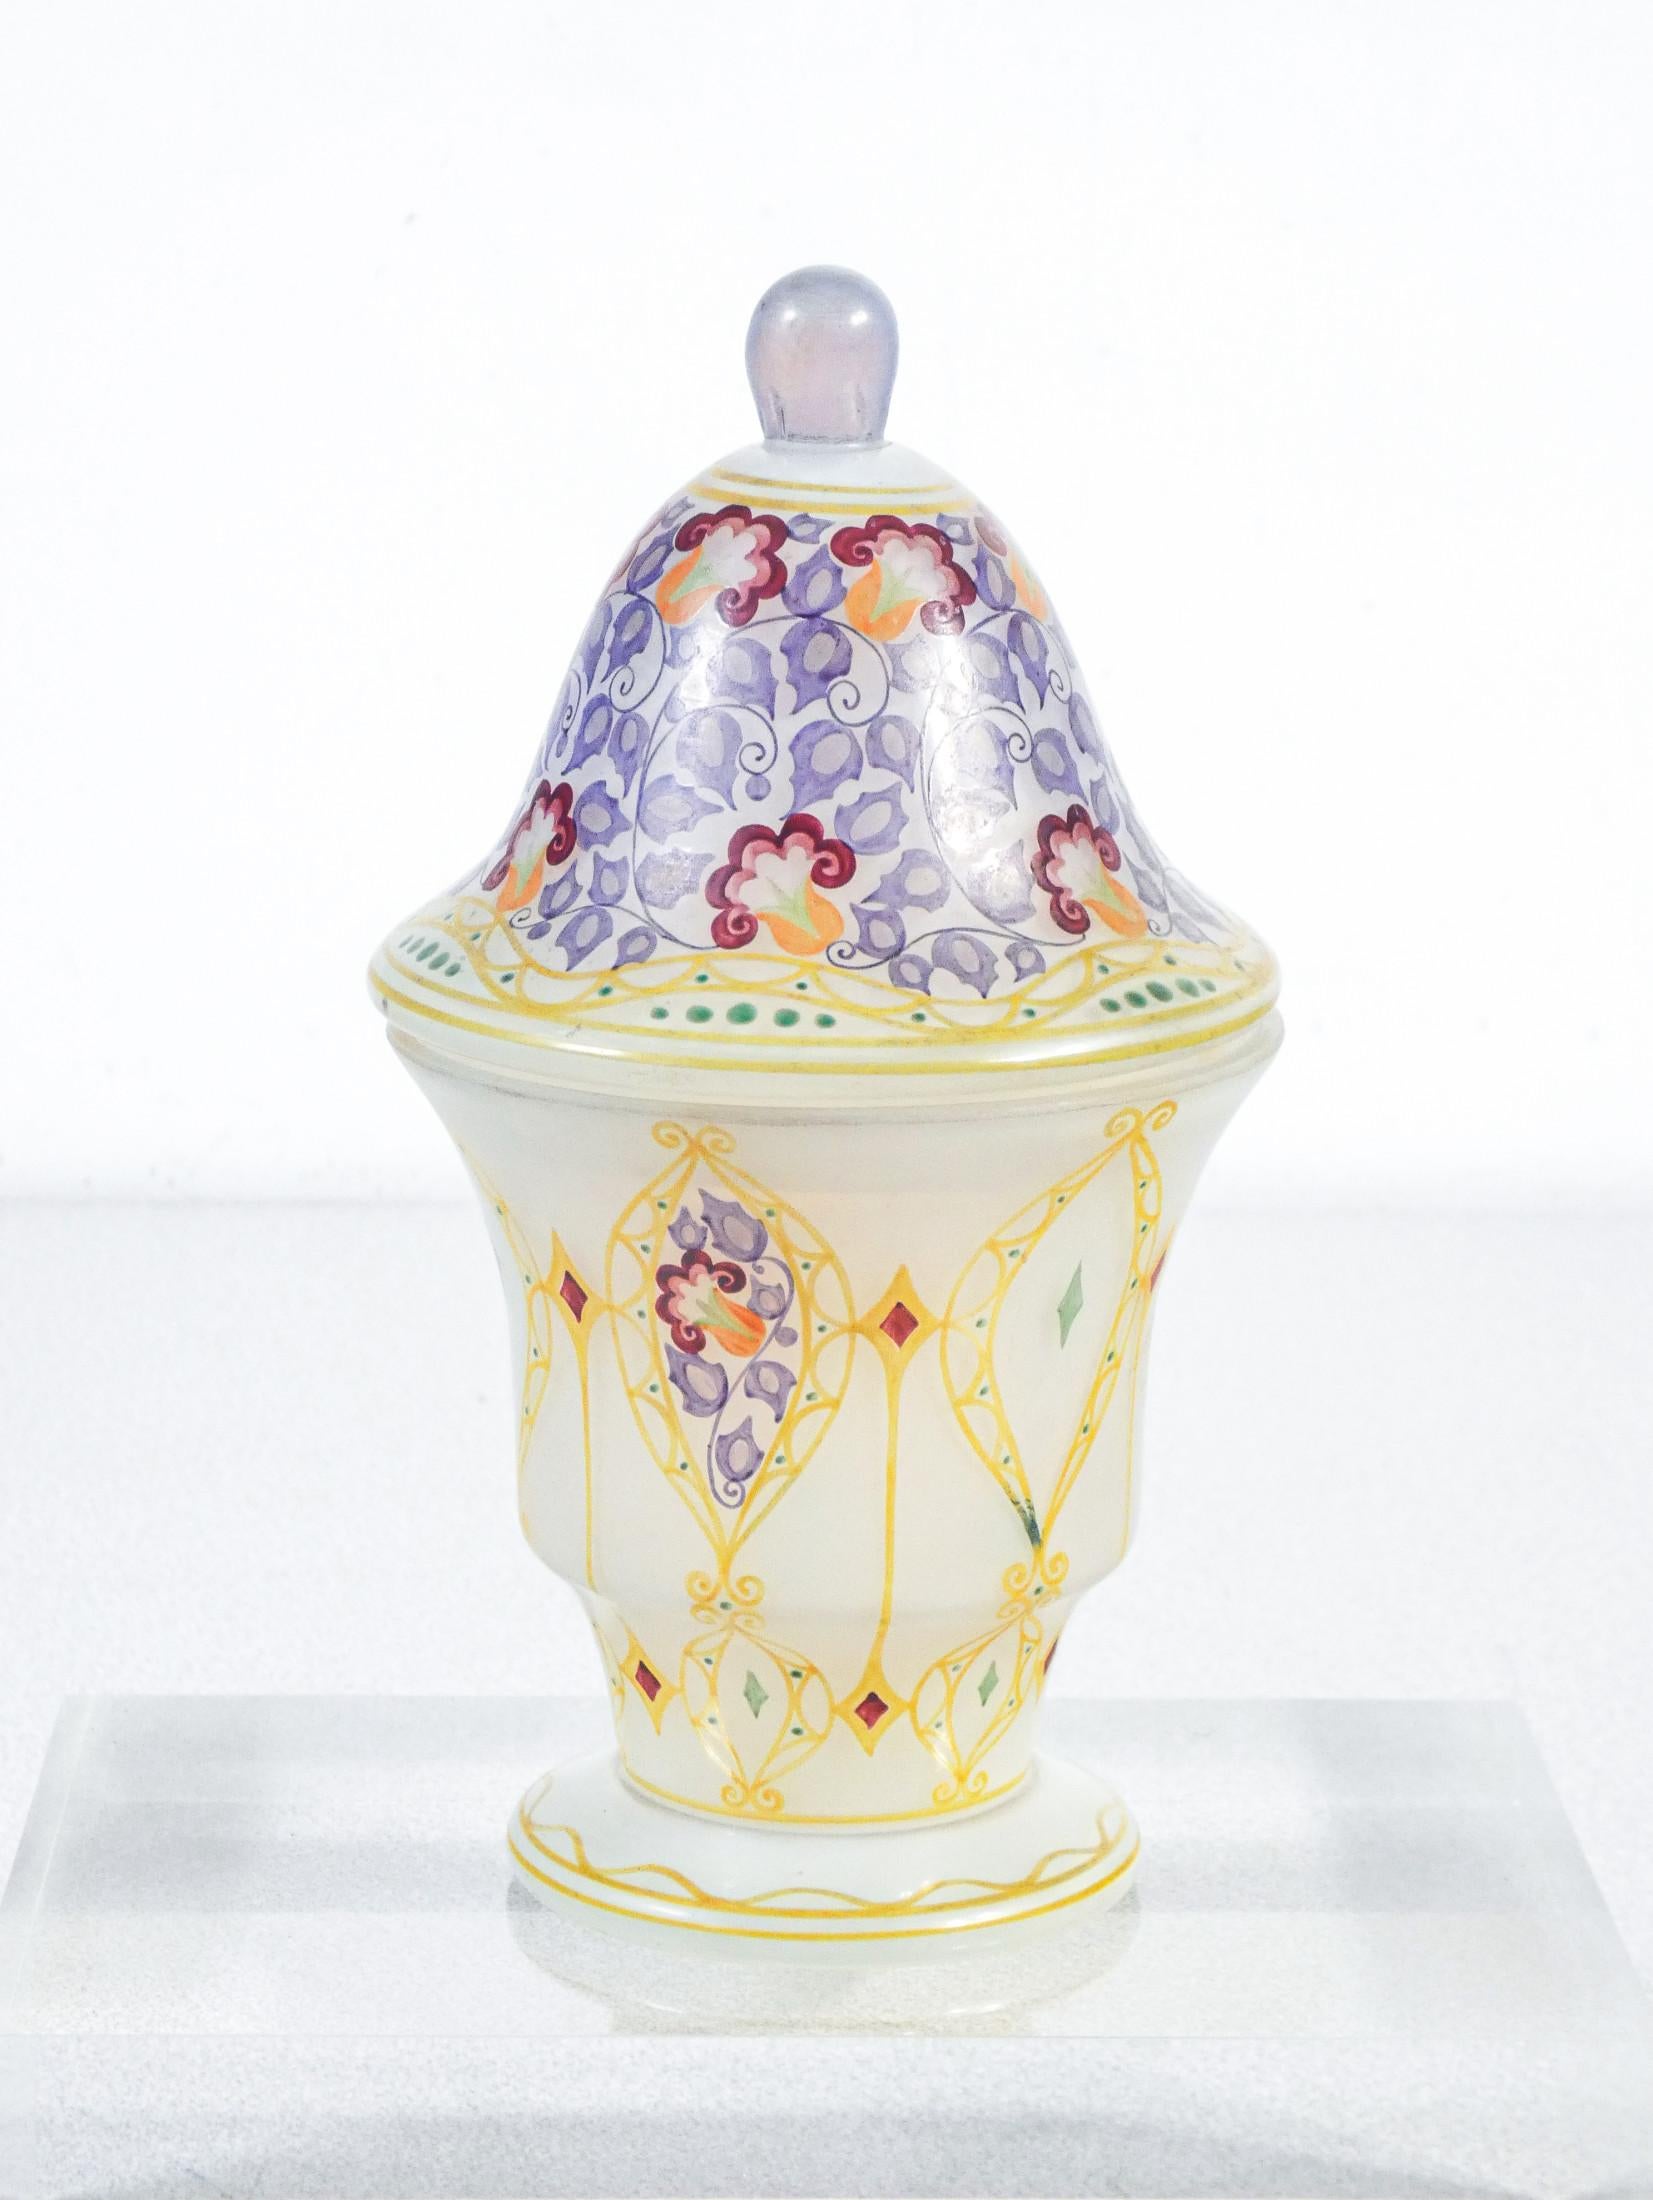 Small vase with lid in Art Nouveau style.
Hand painted opal glass

ORIGIN
France

PERIOD
Early twentieth century

MODEL
Small vase with lid

MATERIALS
Hand painted opal glass

DIMENSIONS
H 19 x Ø 10.5 cm

CONDITIONS
Perfect. No